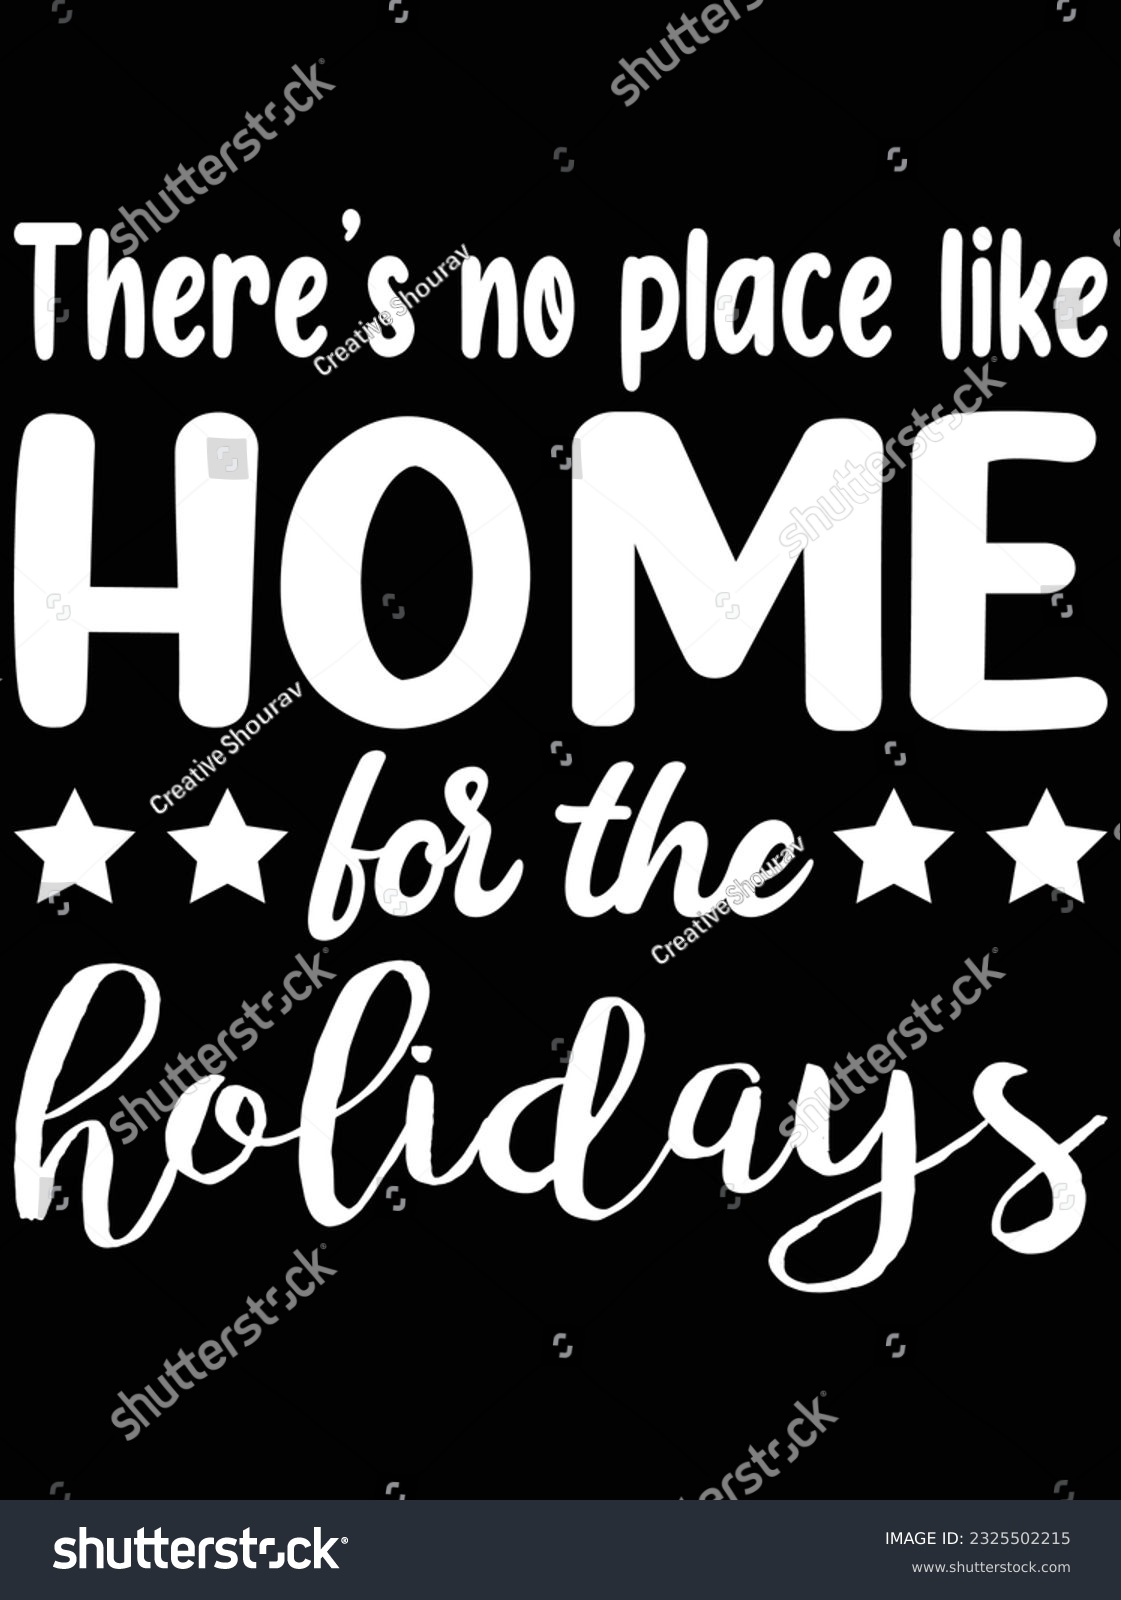 SVG of There's no place like home for the holidays vector art design, eps file. design file for t-shirt. SVG, EPS cuttable design file svg